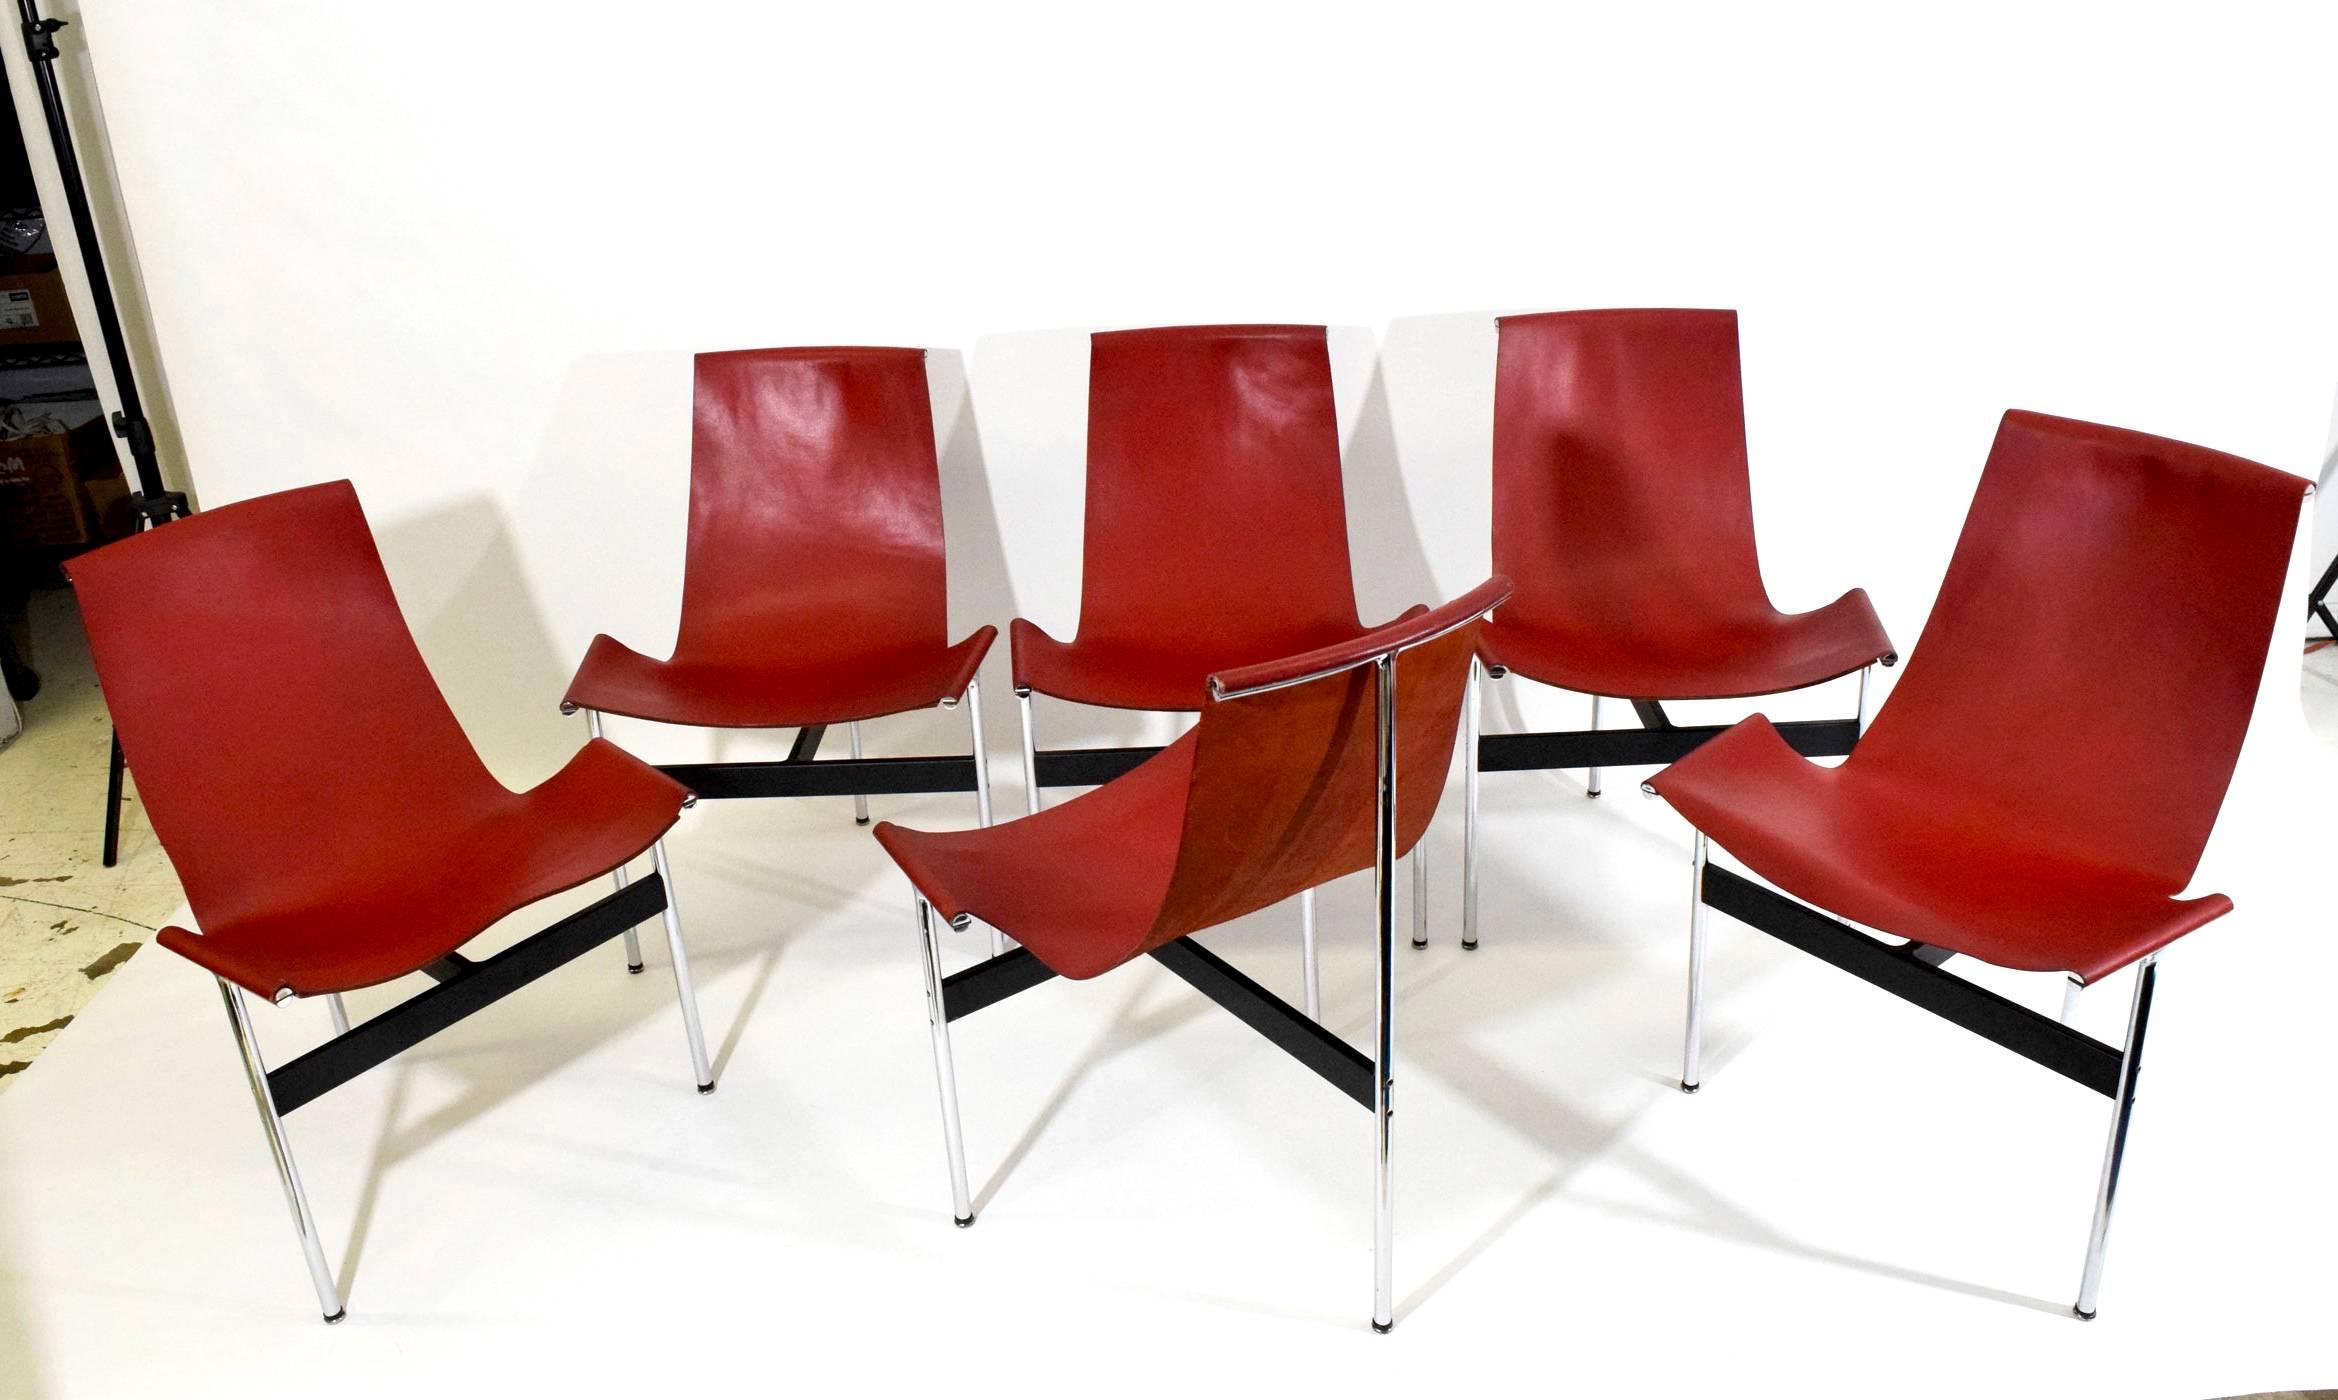 Set of six red leather T-chairs by Katavolos, Littell and Kelly for Laverne International.